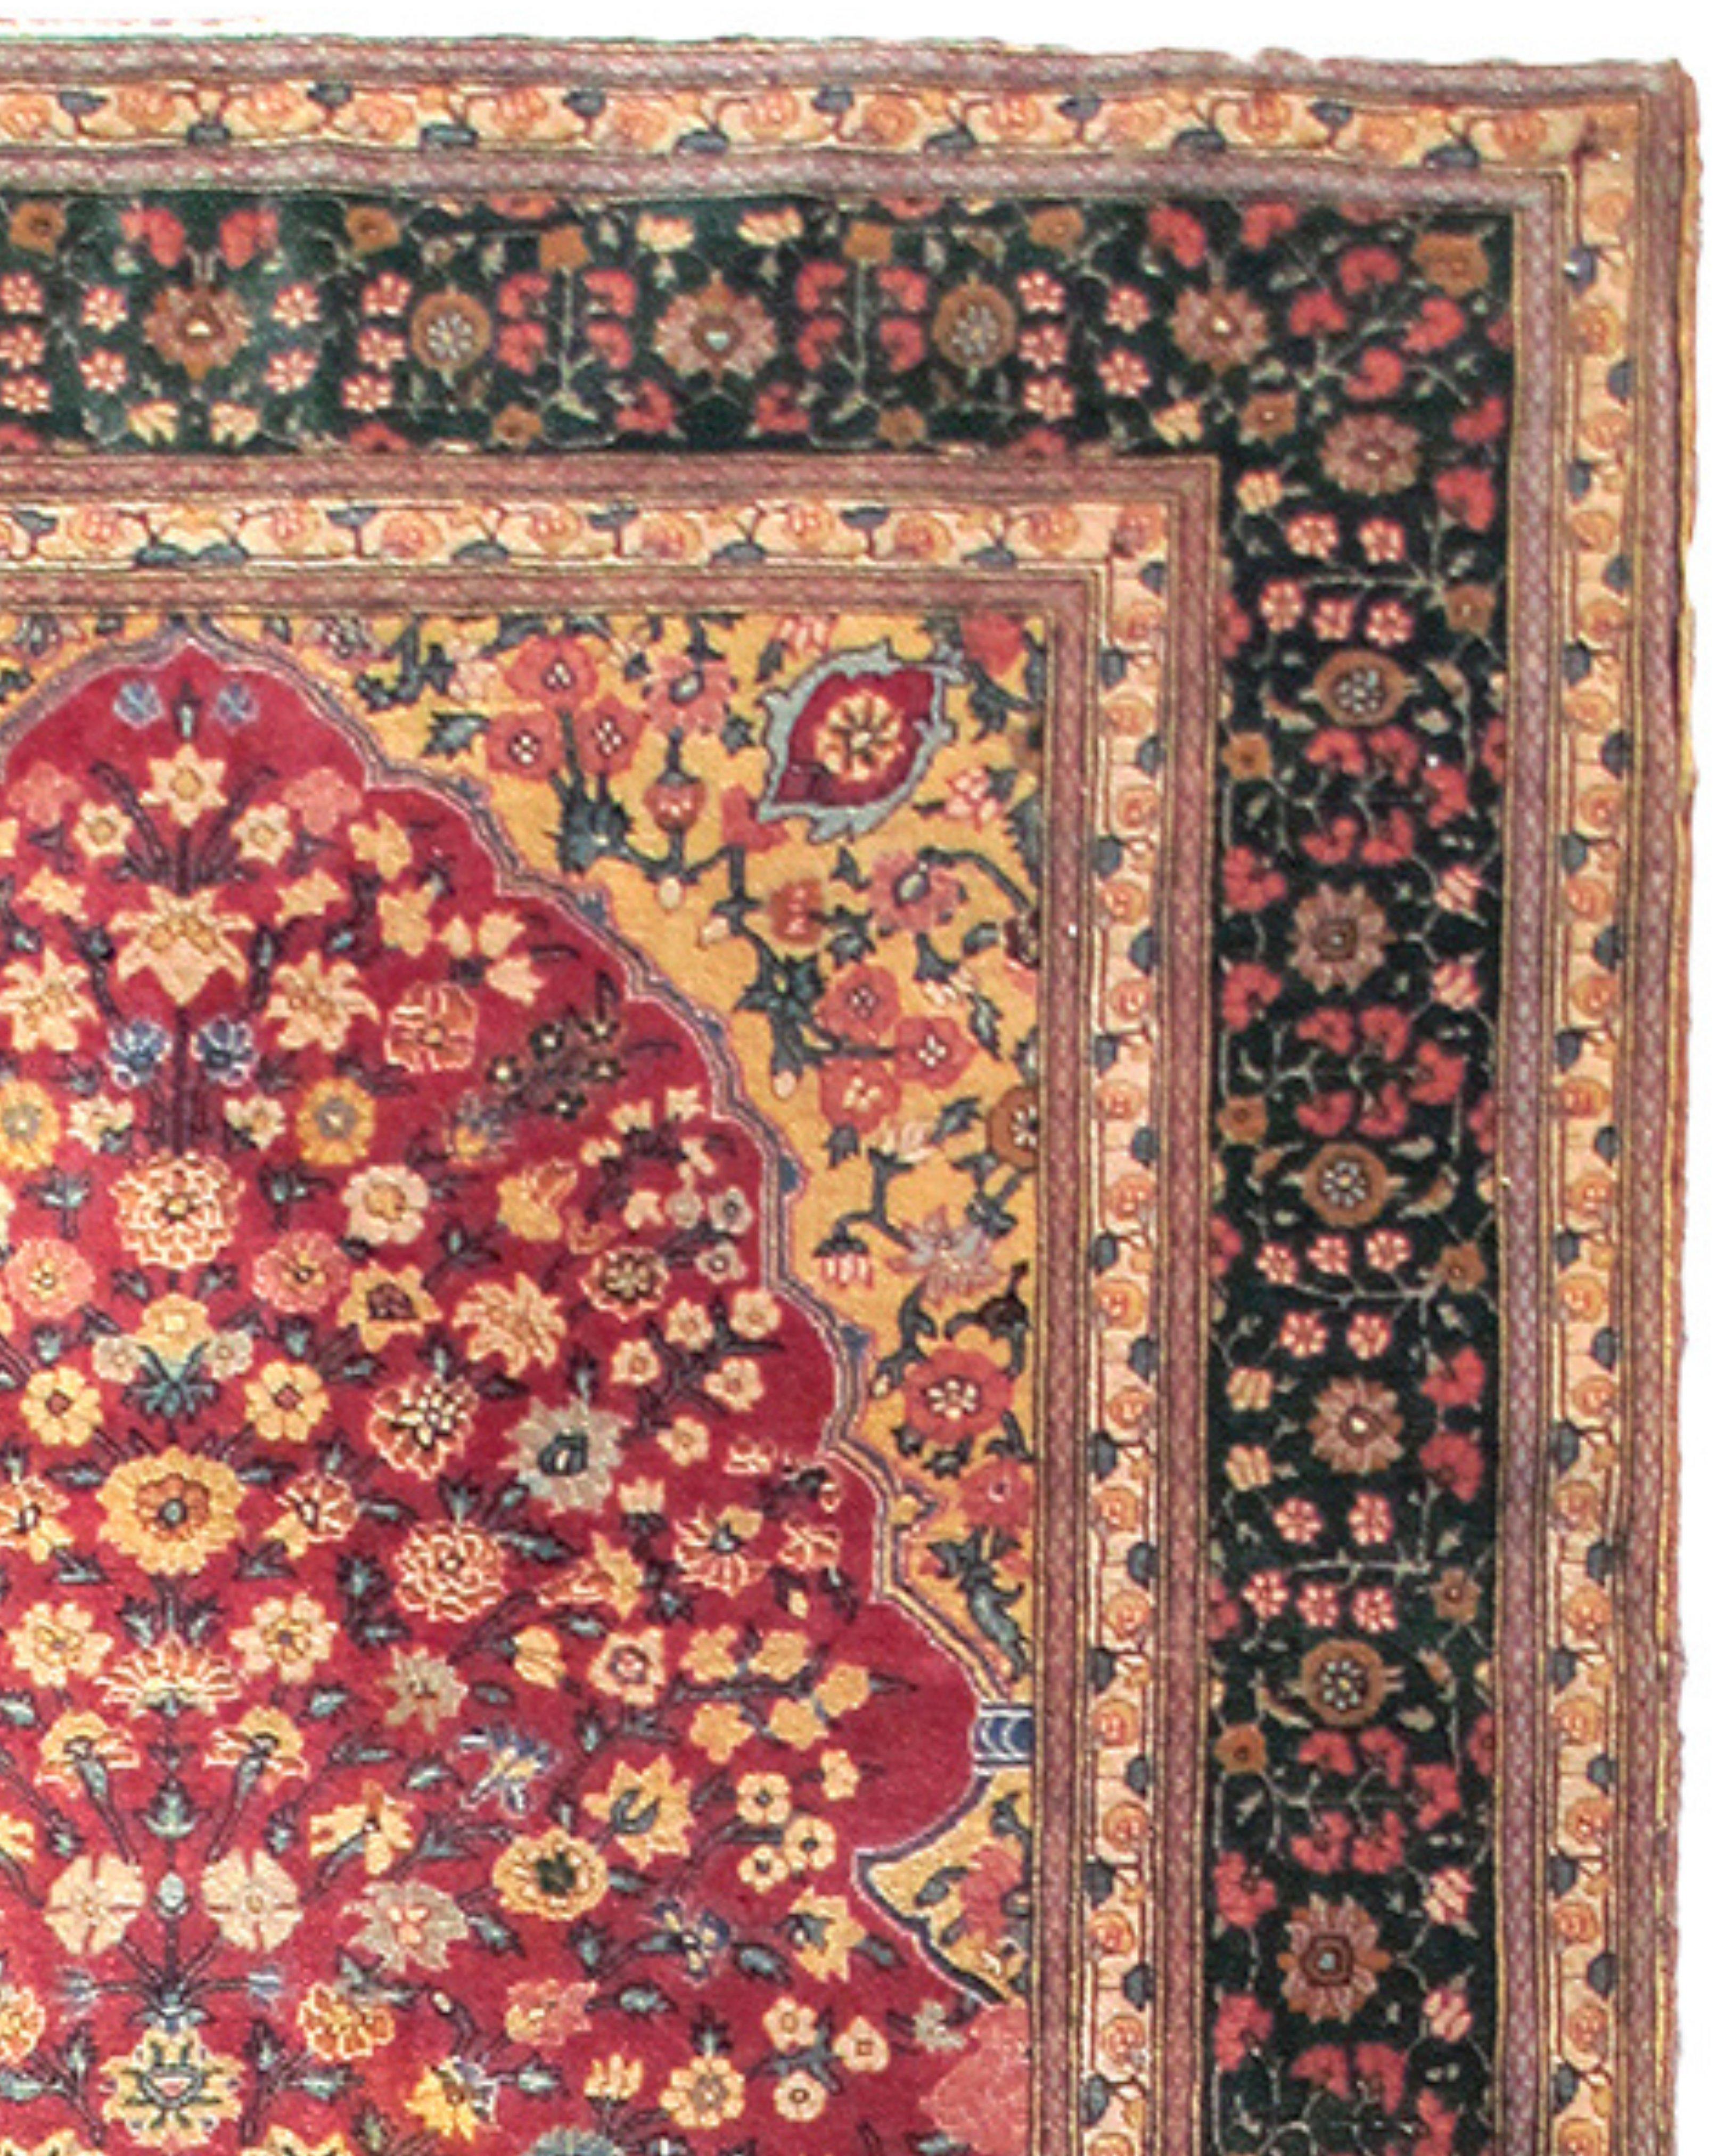 Hand-Knotted Indian Mille Fleurs Rug, c. 1900 For Sale